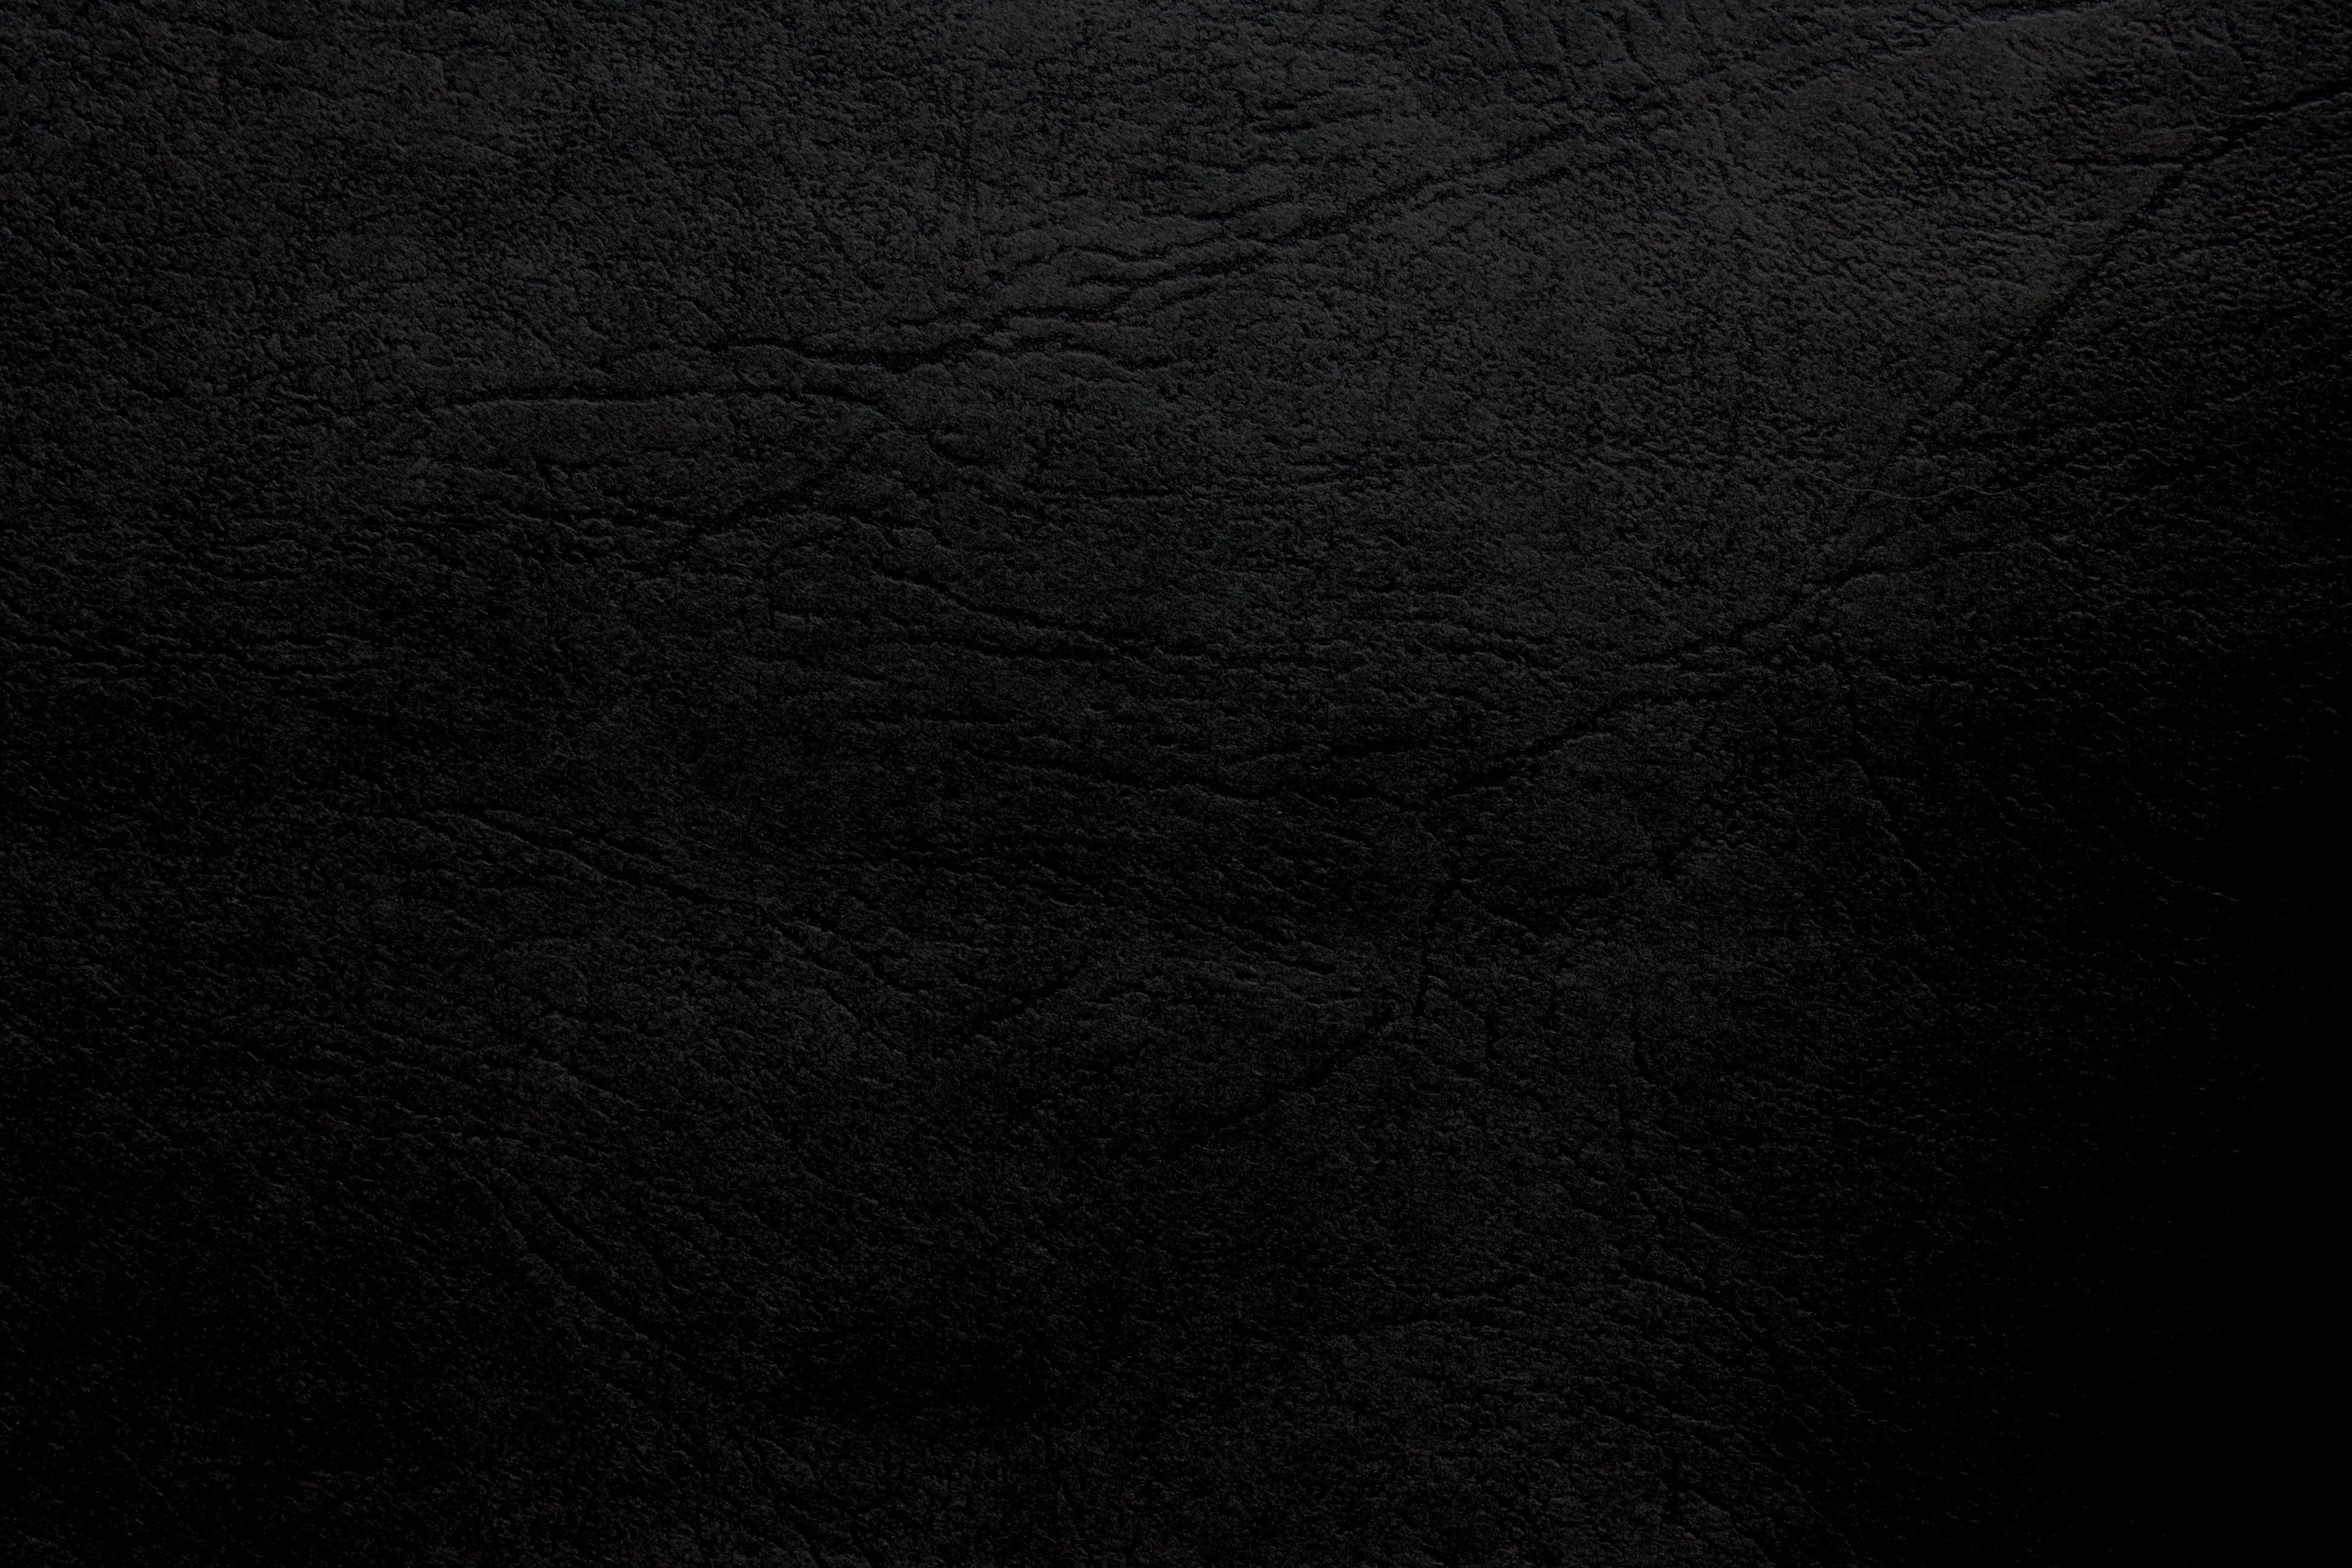 Leather Surface Background Six | Photo Texture & Background